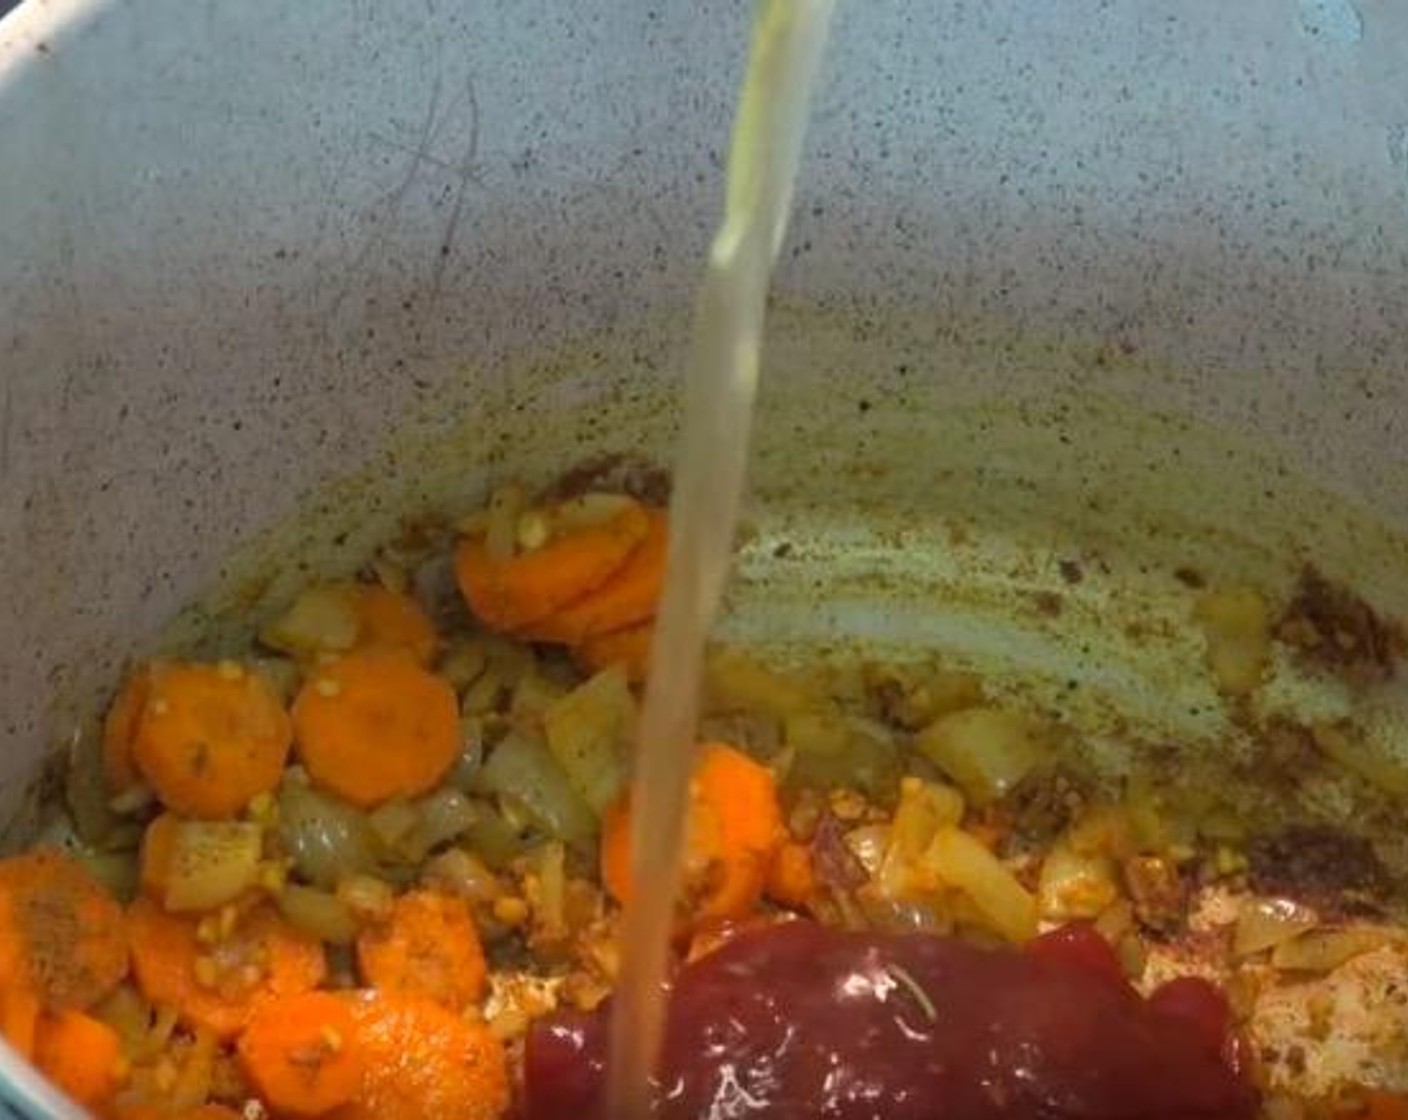 step 3 Add Curry Powder (1 Tbsp) and stir in until it becomes fragrant. Add Fruit Chutney (2 Tbsp) and Chicken Stock (2 cups). Return sausages to the pot, cover and bring to a boil.